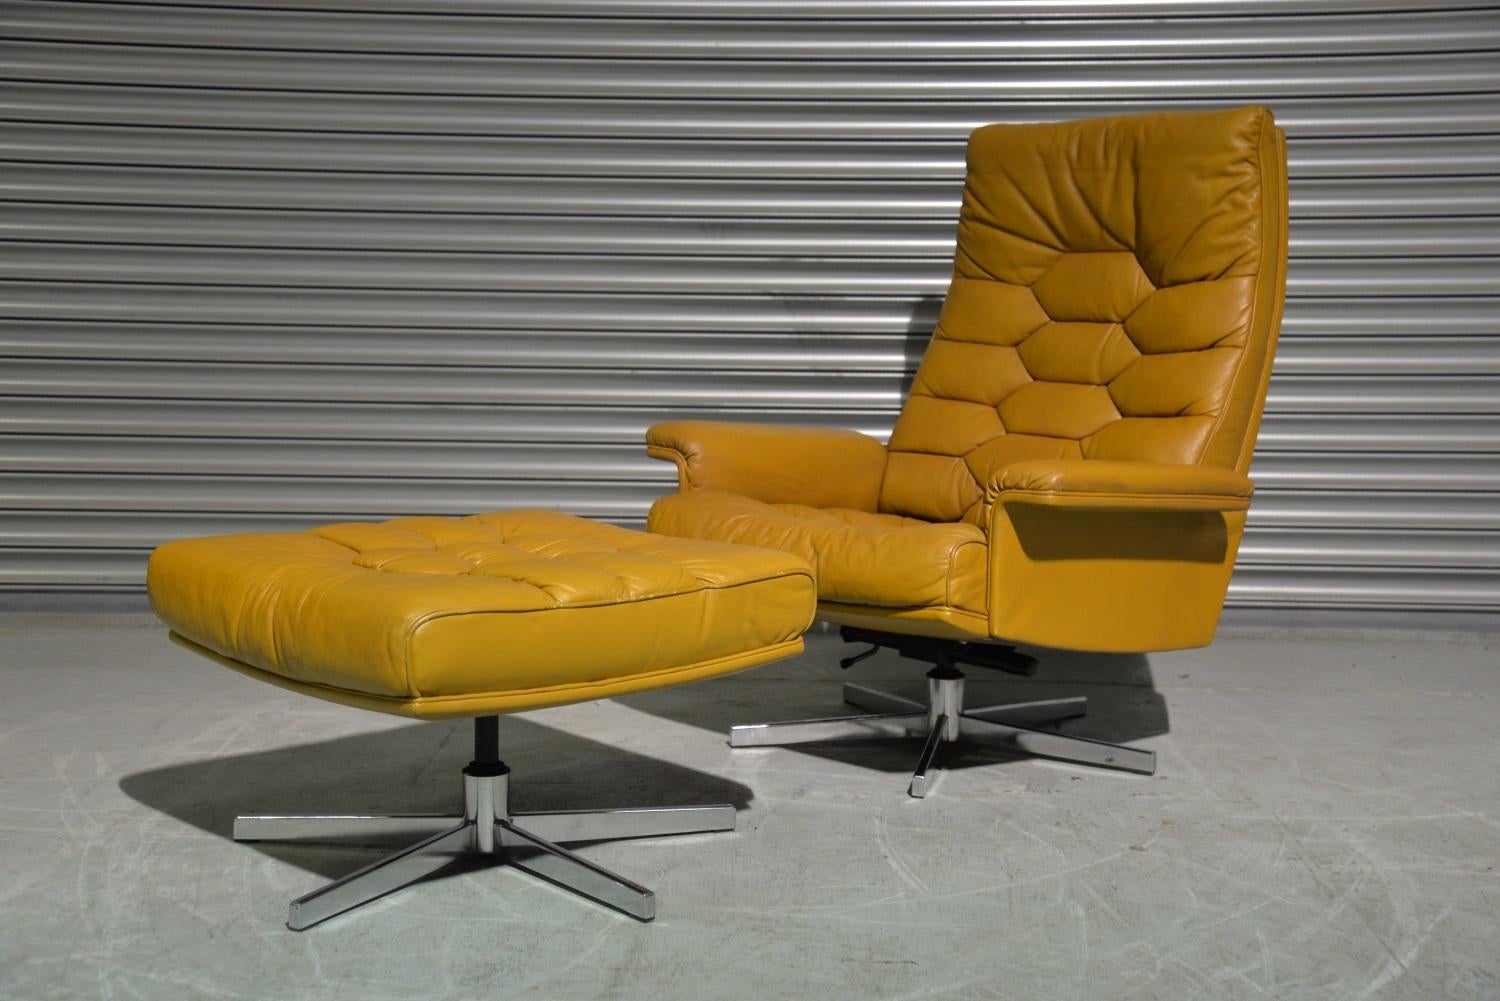 Discounted airfreight for our International and US customers ( from 2 weeks door to door) 

We are delighted to bring to you an ultra-rare and highly desirable De Sede Executive swivel lounge armchair and ottoman. Built in the 1970s by De Sede